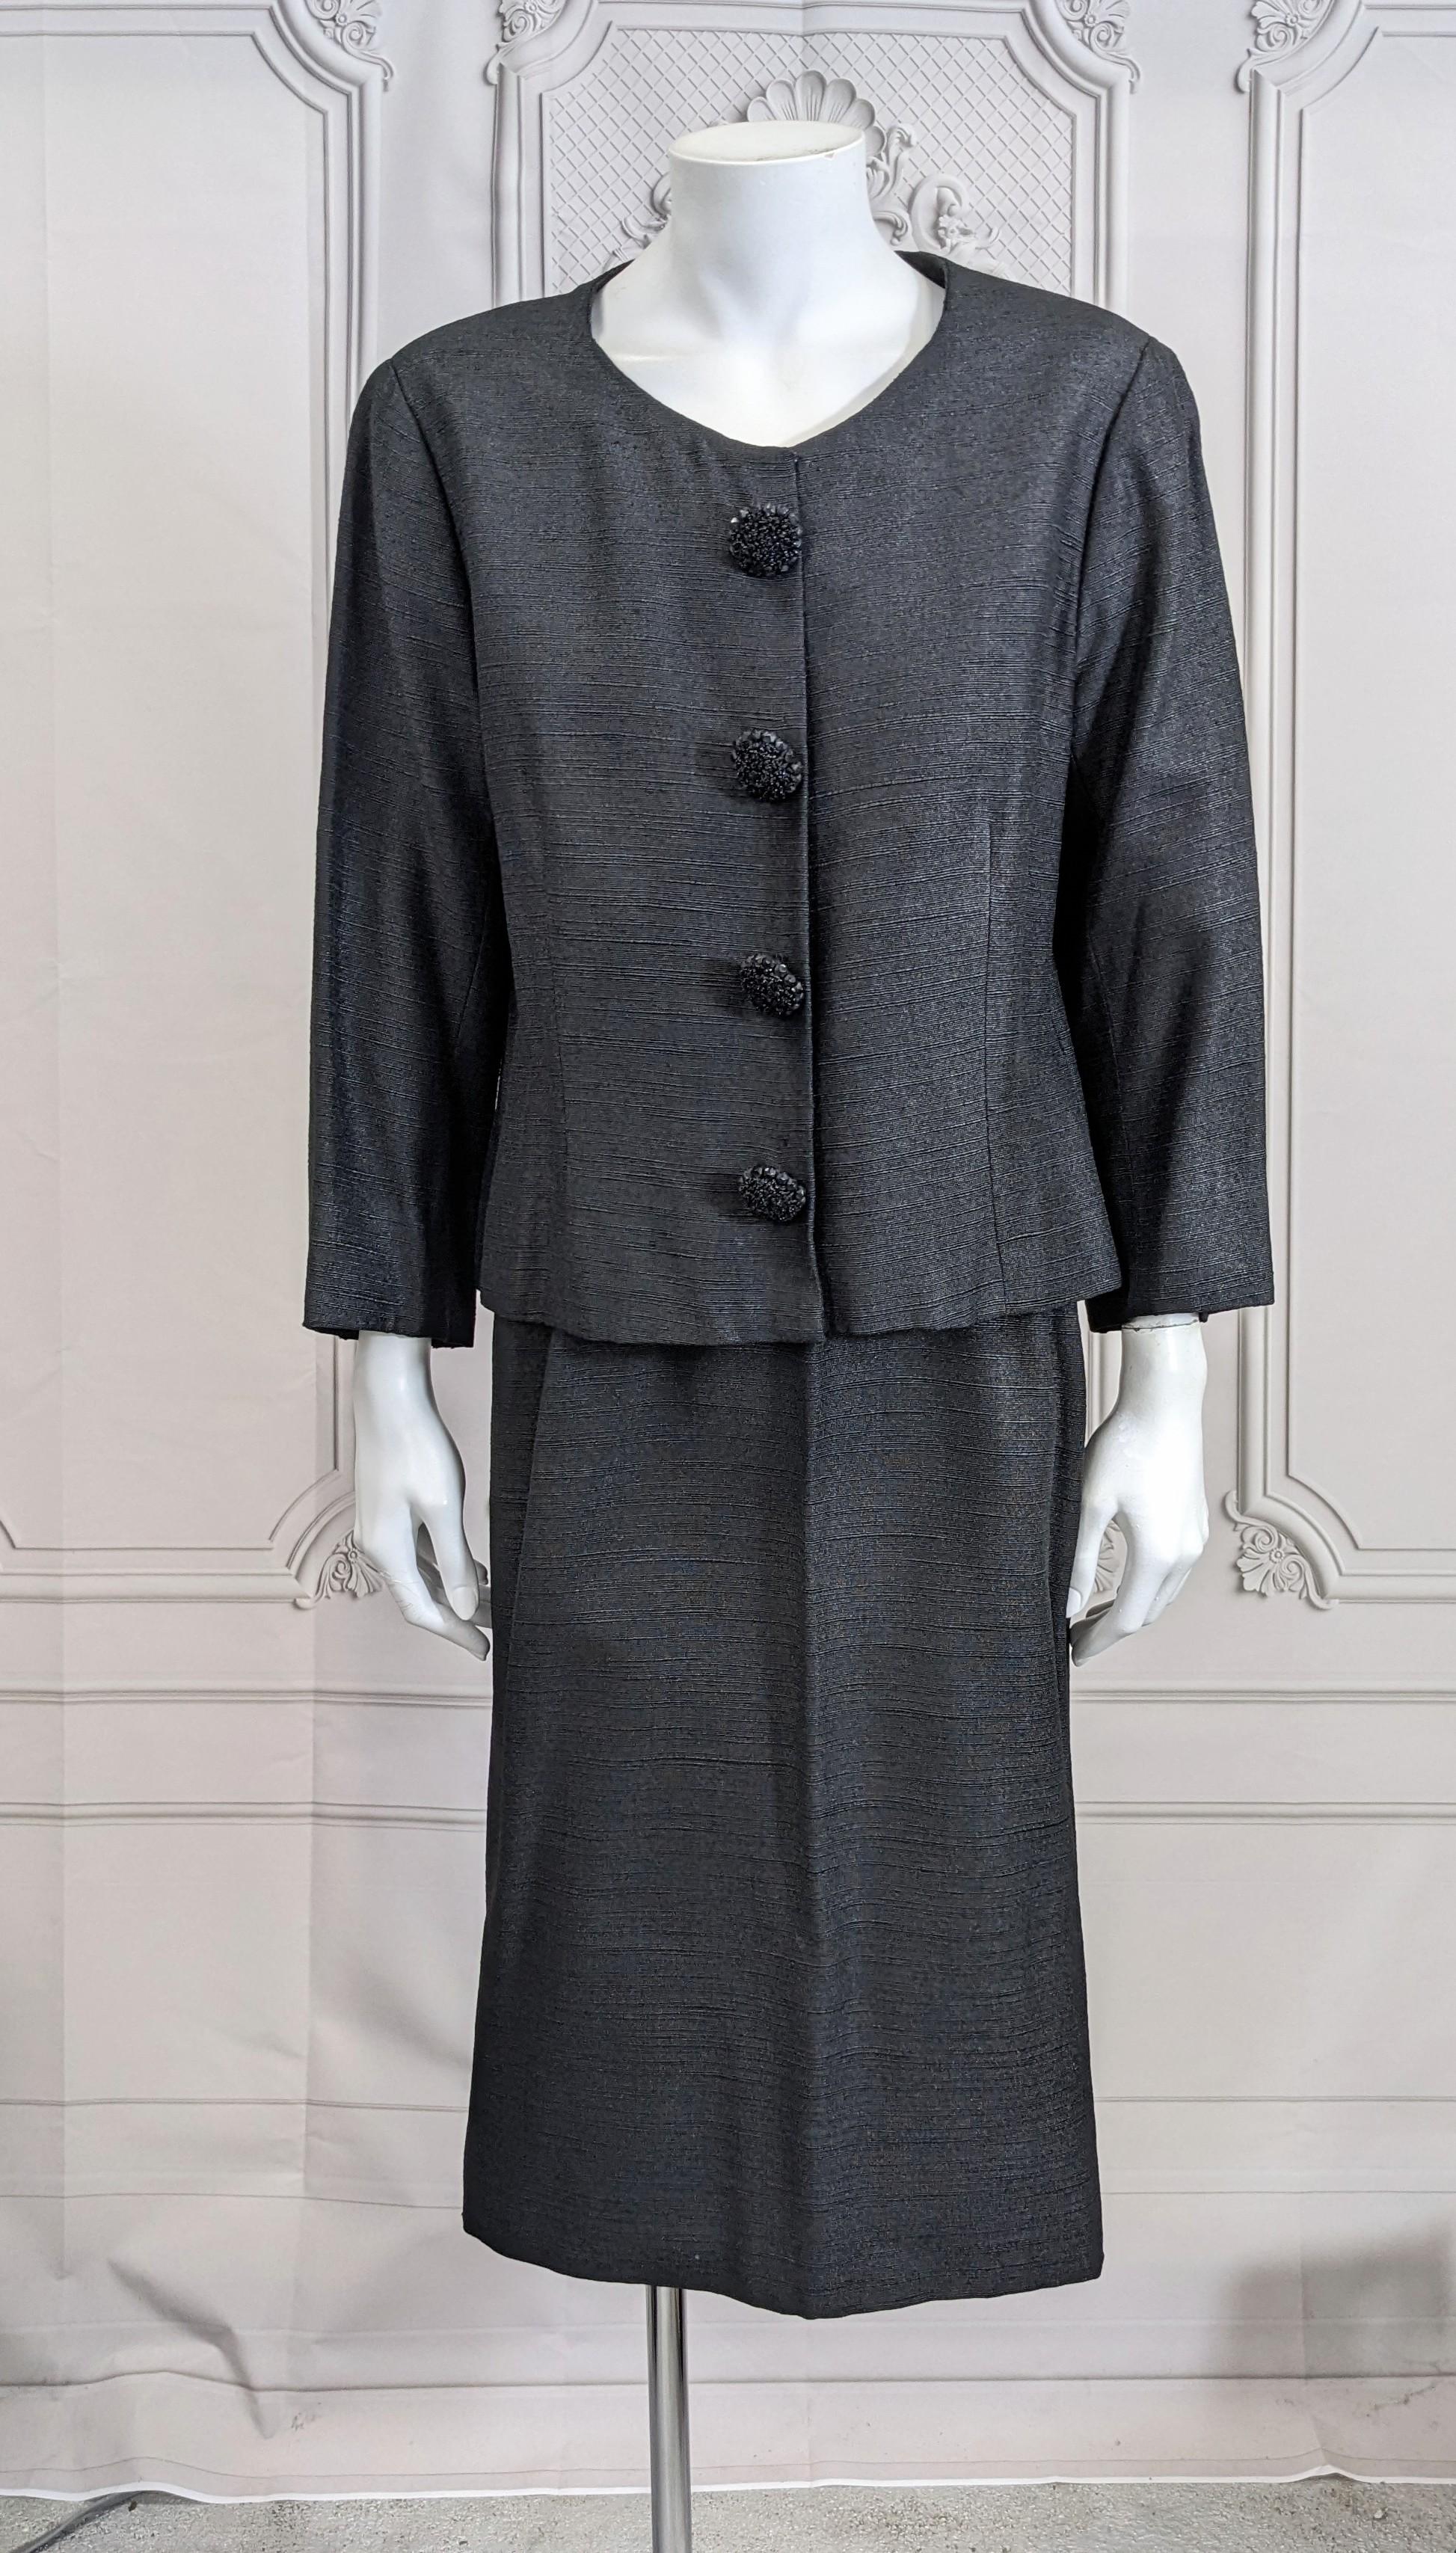 Elegant Cristobal Balenciaga Haute Couture Ribbed Silk Suit in an unusual black textile with slight sheen, likely of silk with wool. Deceptively simple cut with incredible hand made beaded buttons. Slim skirt with tiny side slits. Fully lined Jacket